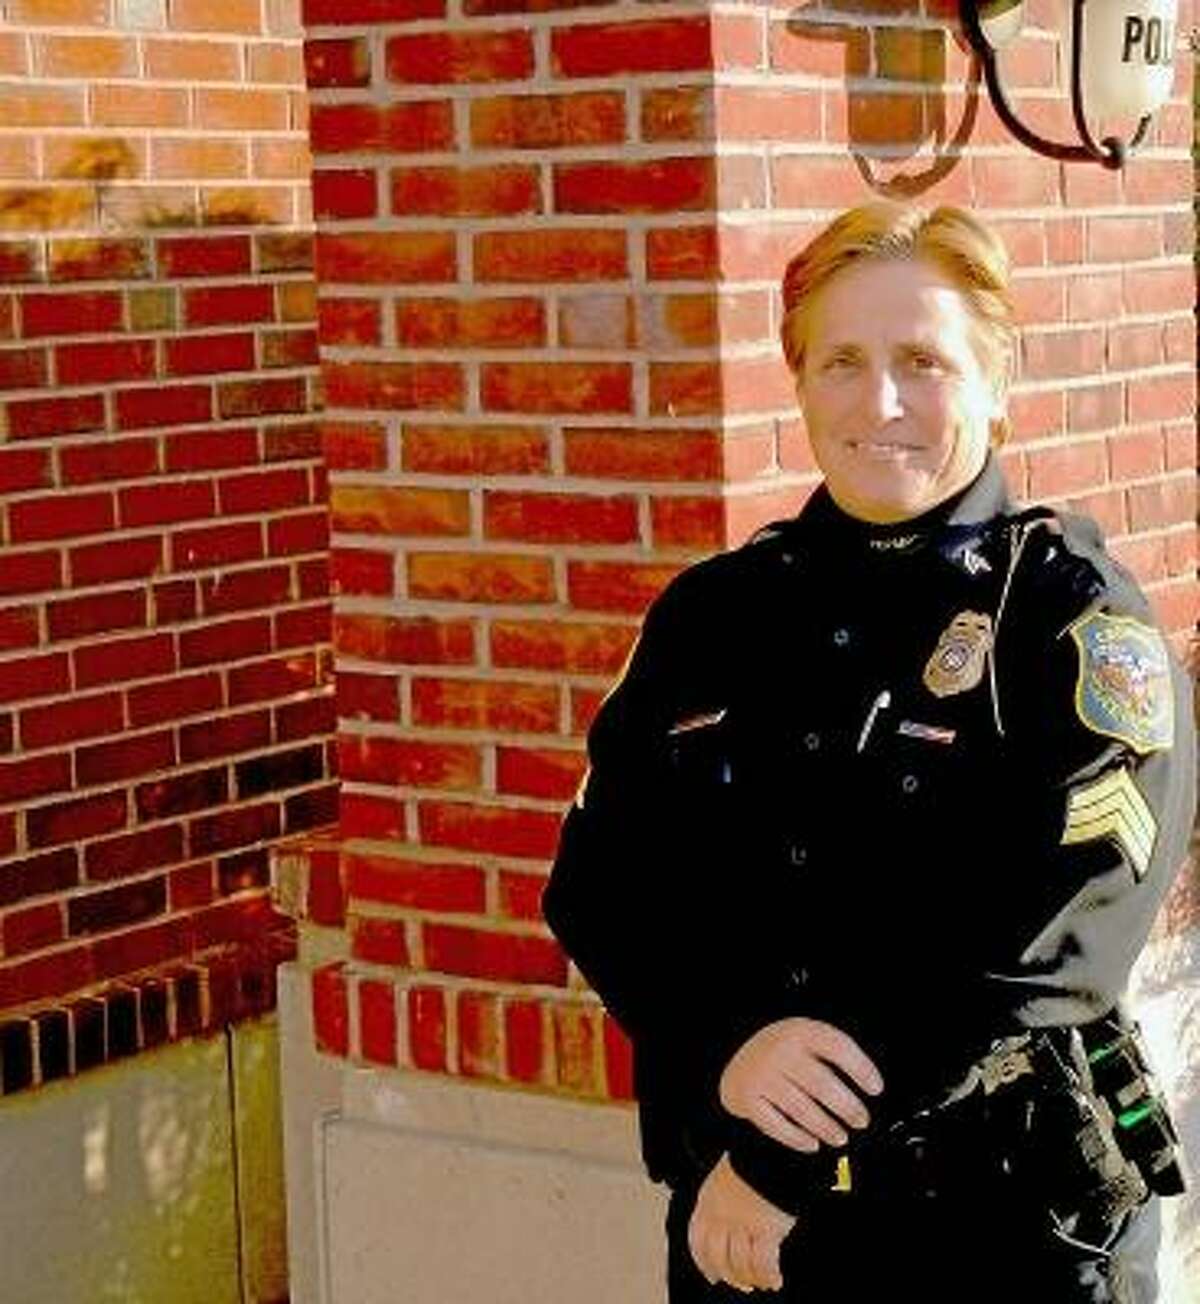 Sgt. Denise Lamontagne, who was named Friday as the new captain of the Cromwell Police Department. Cromwell Police Department photo